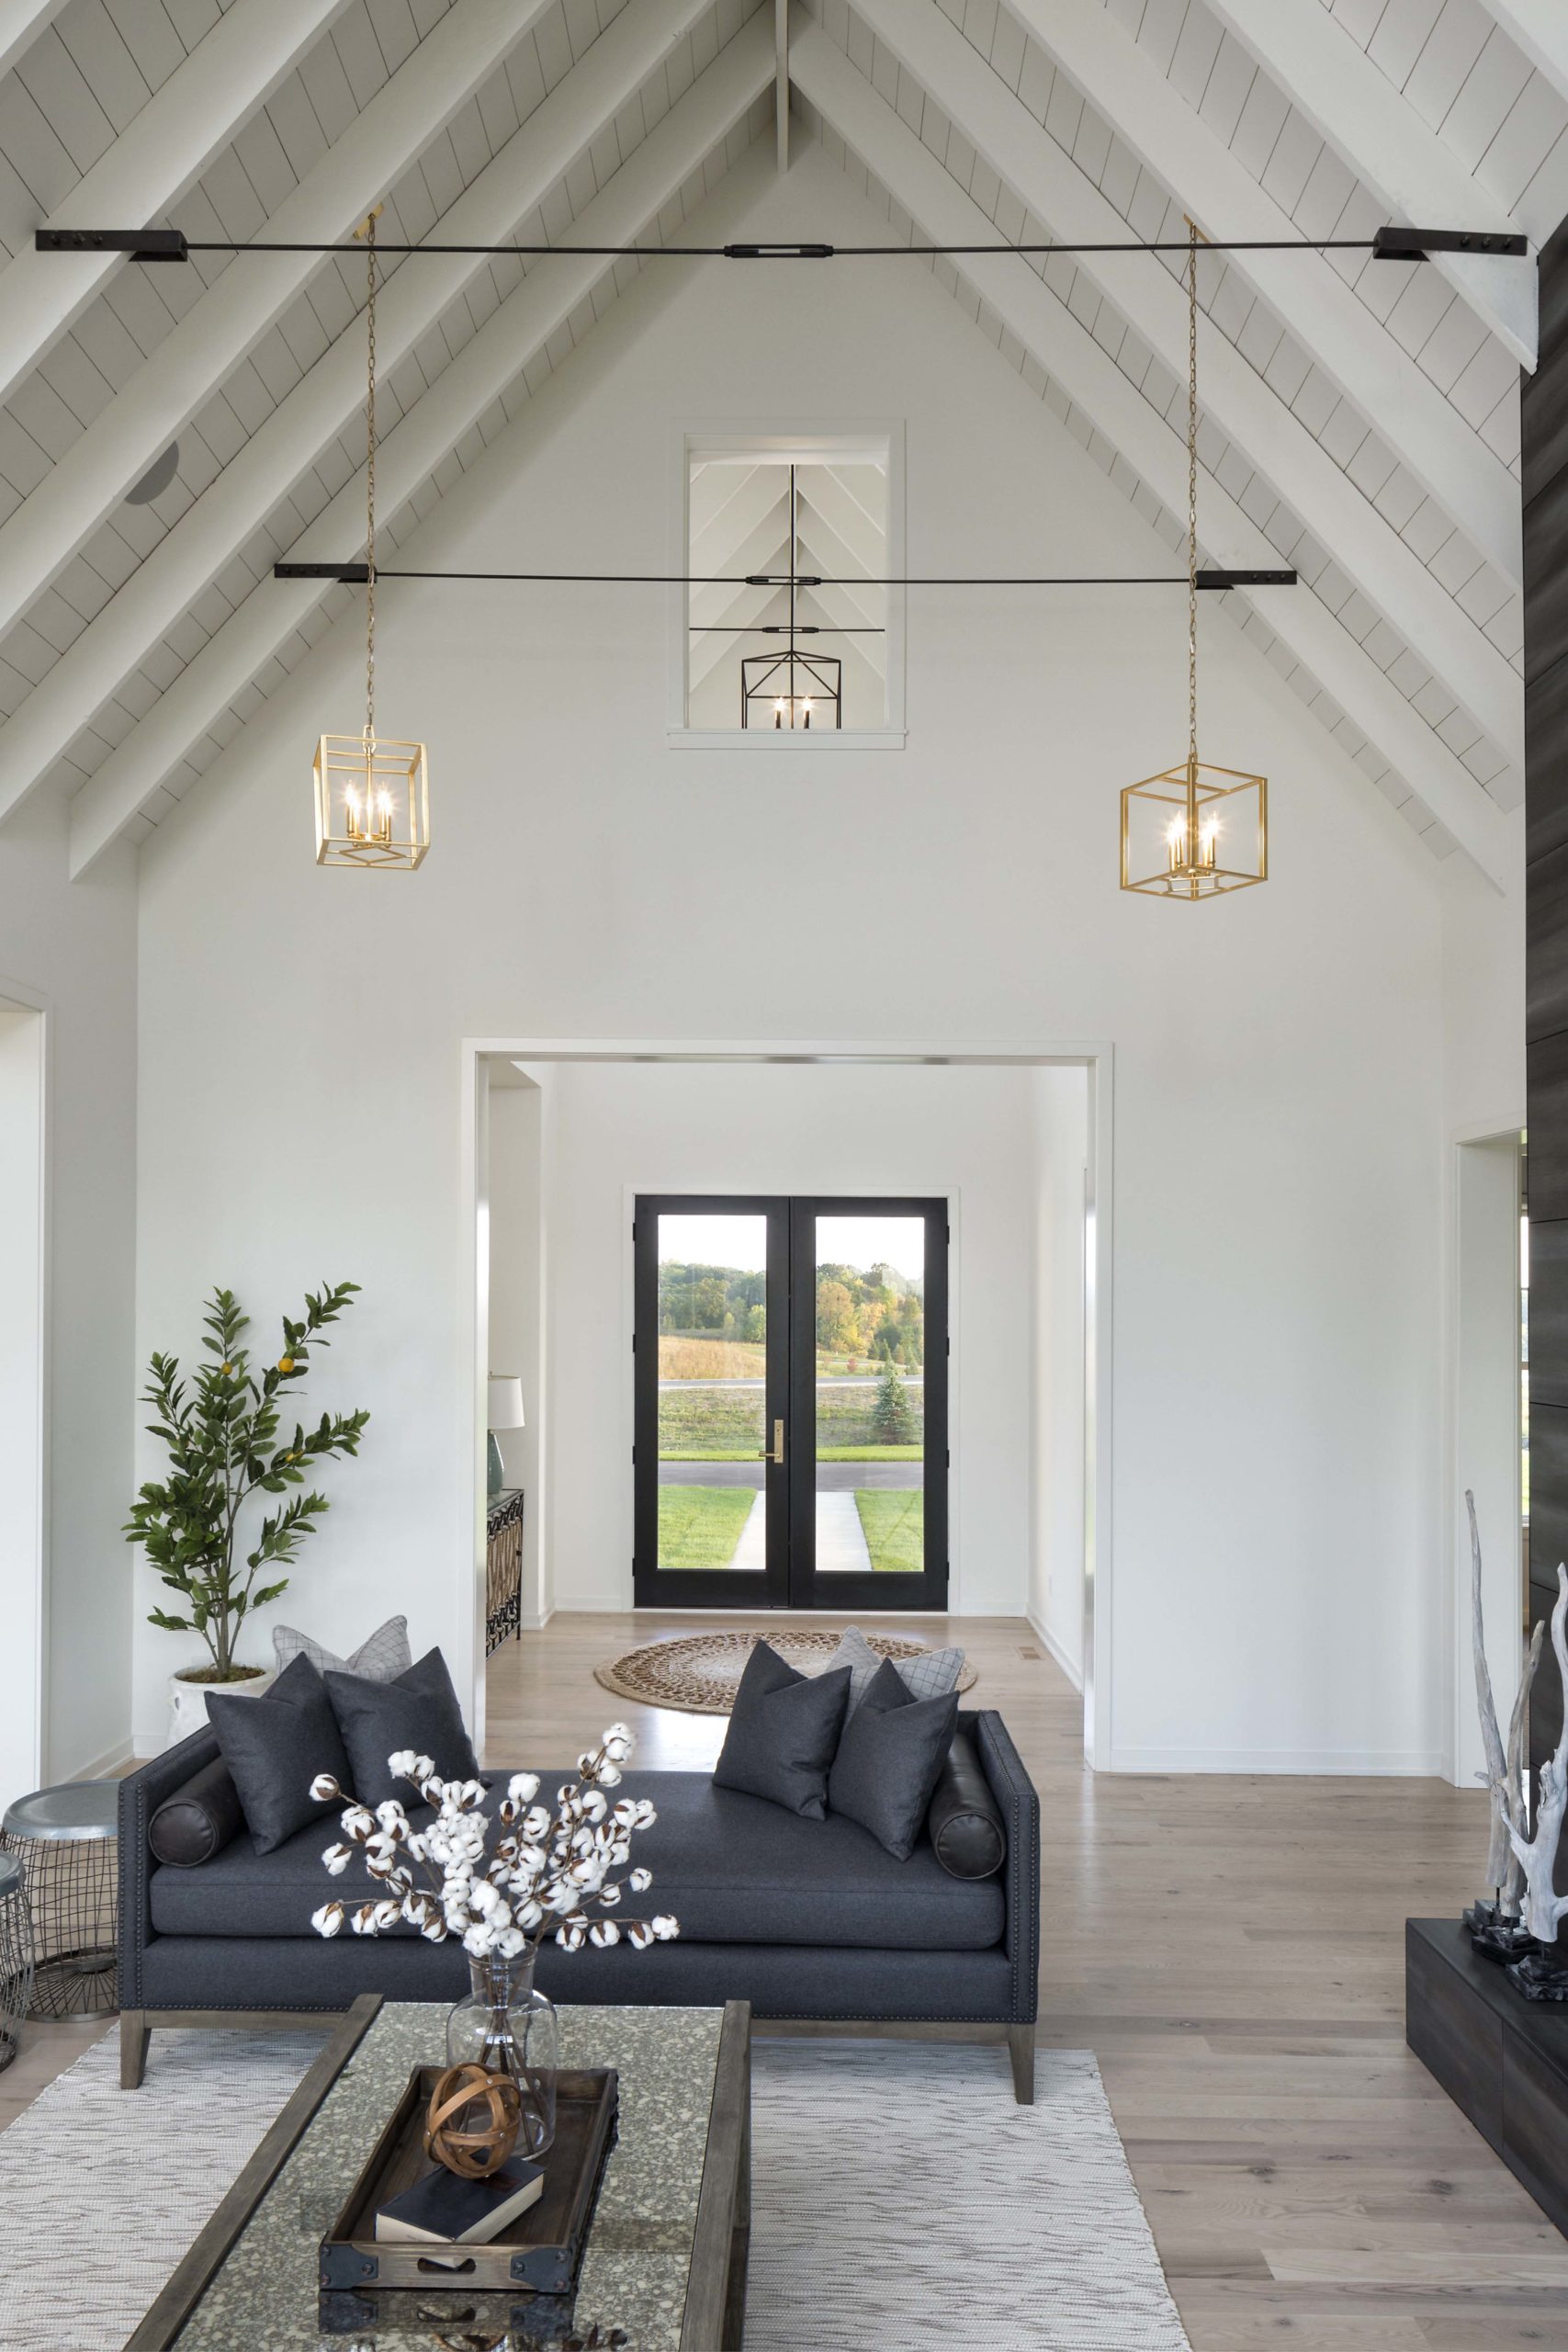 A modern living room with a vaulted ceiling in a farmhouse-style home in Lakeville, Minnesota.